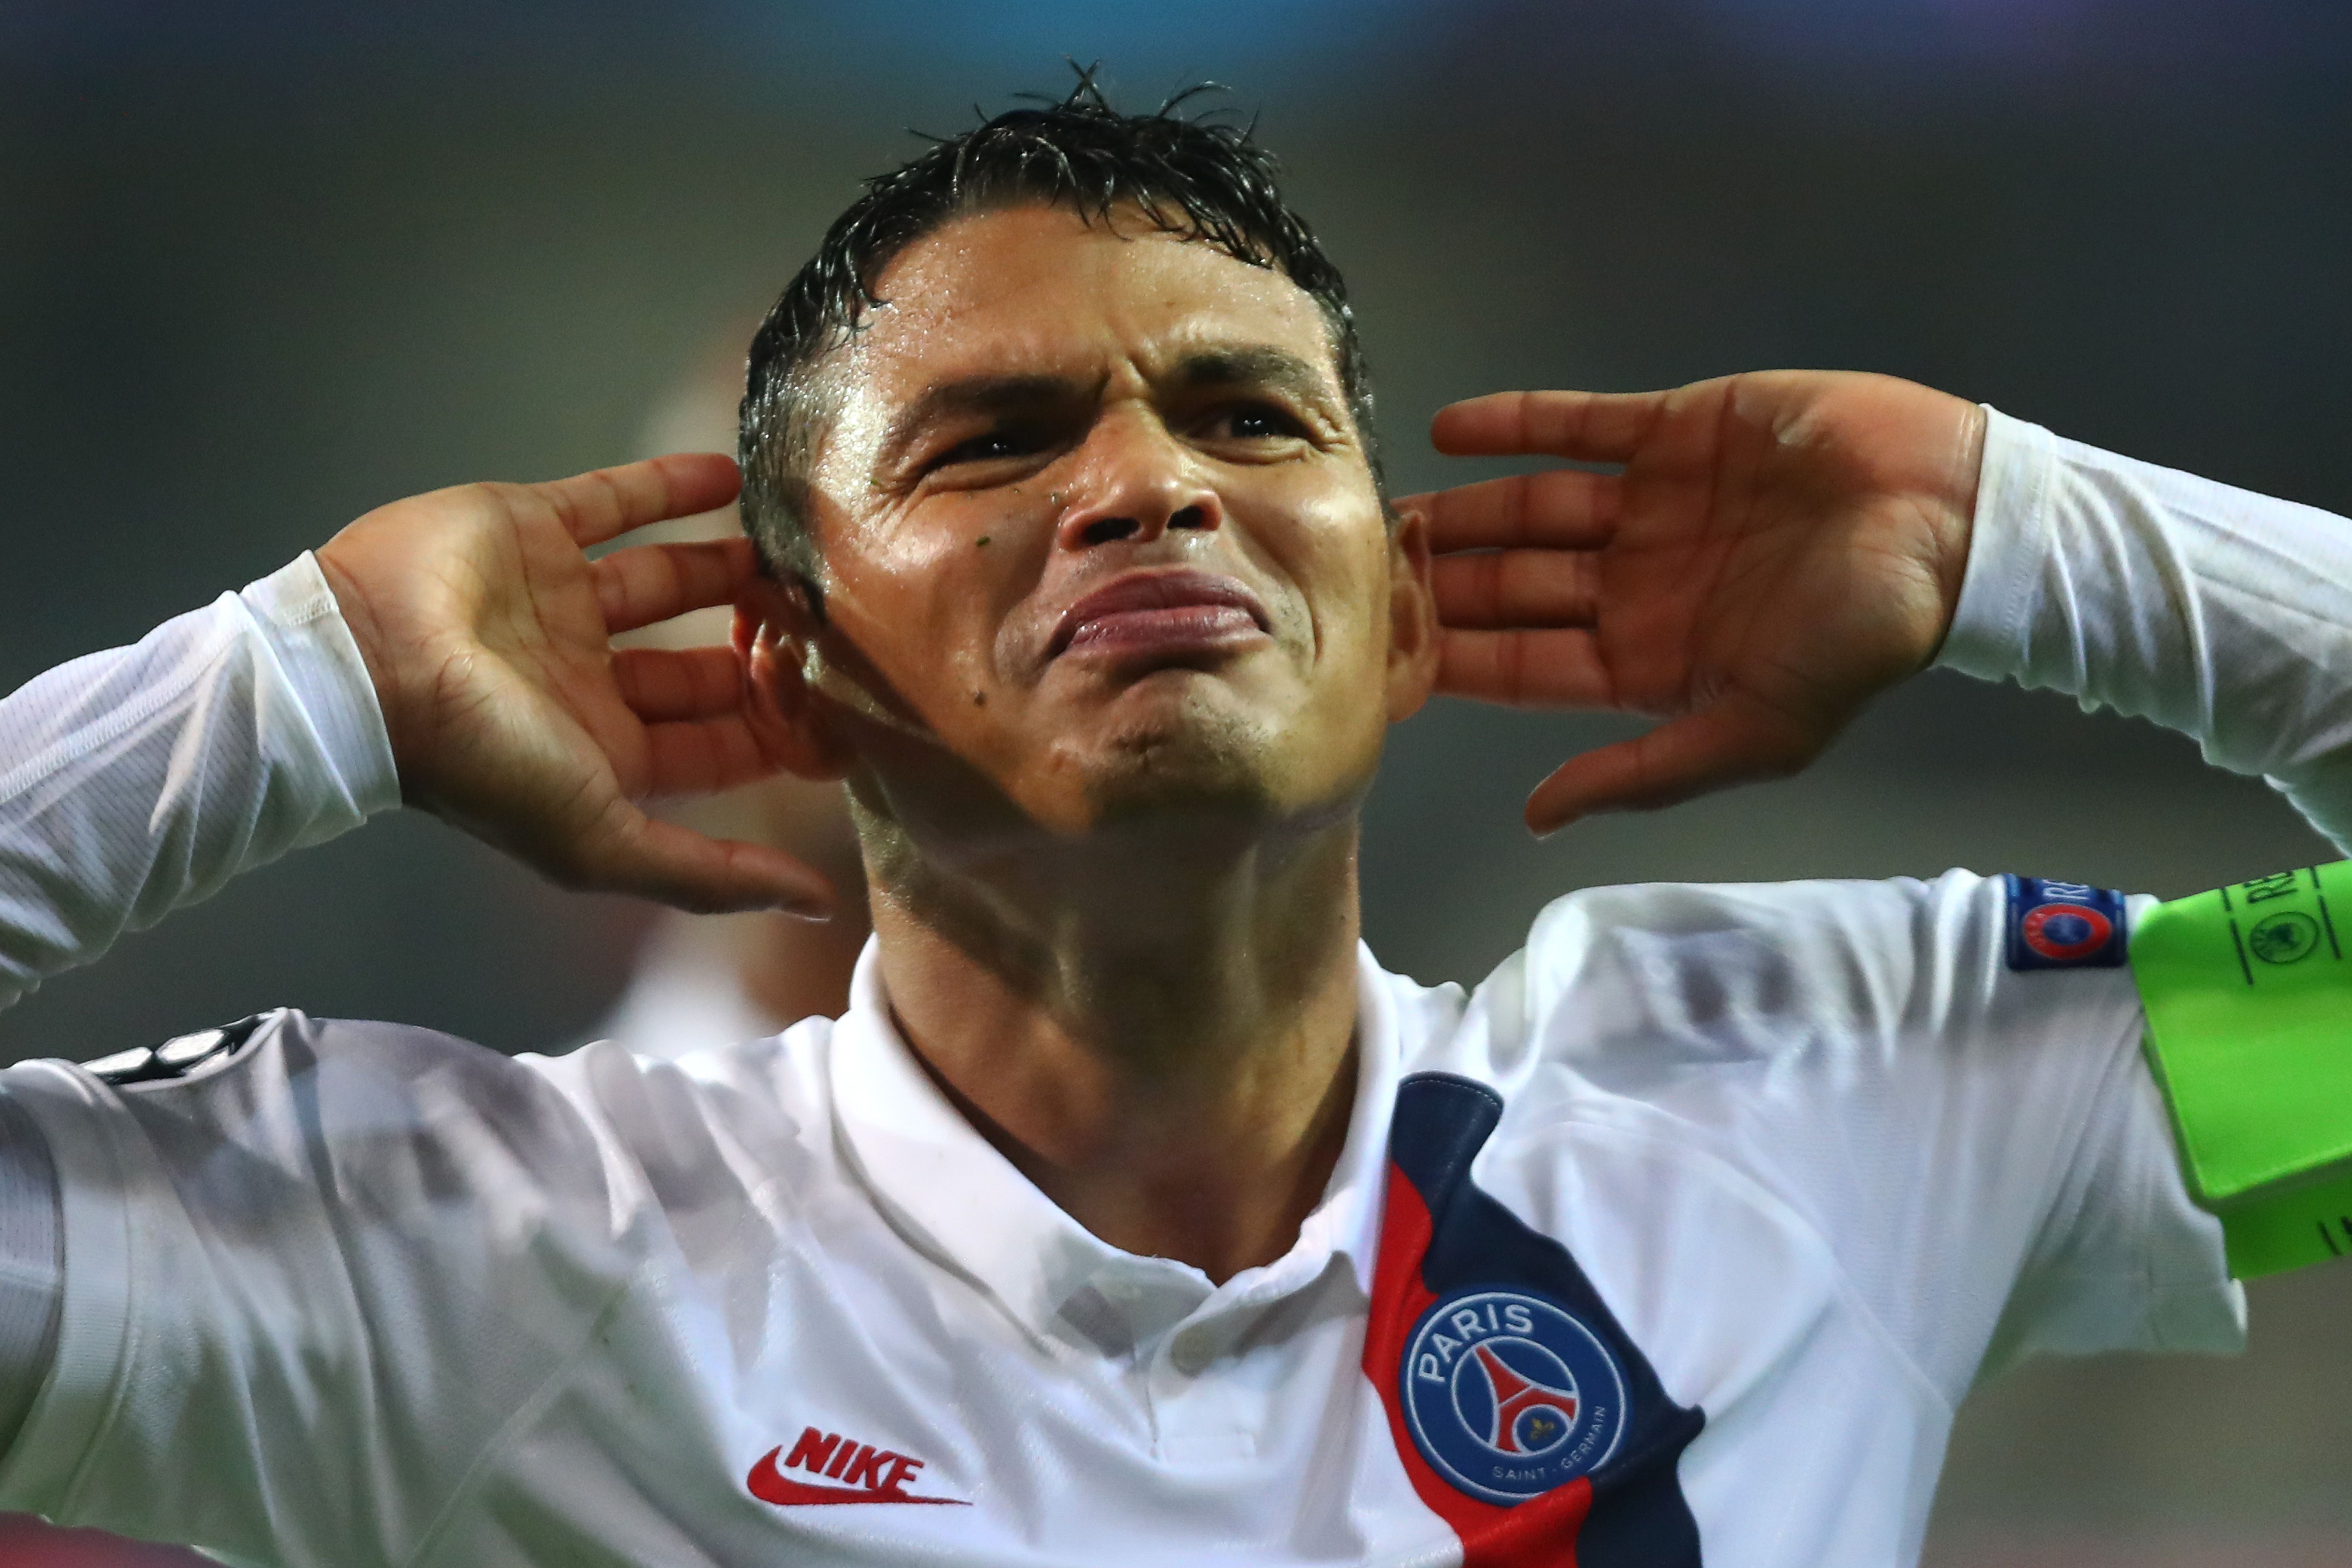 Thiago Silva of PSG celebrates victory with the fans after the UEFA Champions League group A match between Club Brugge KV and Paris Saint-Germain at Jan Breydel Stadium on October 22, 2019 in Brugge, Belgium